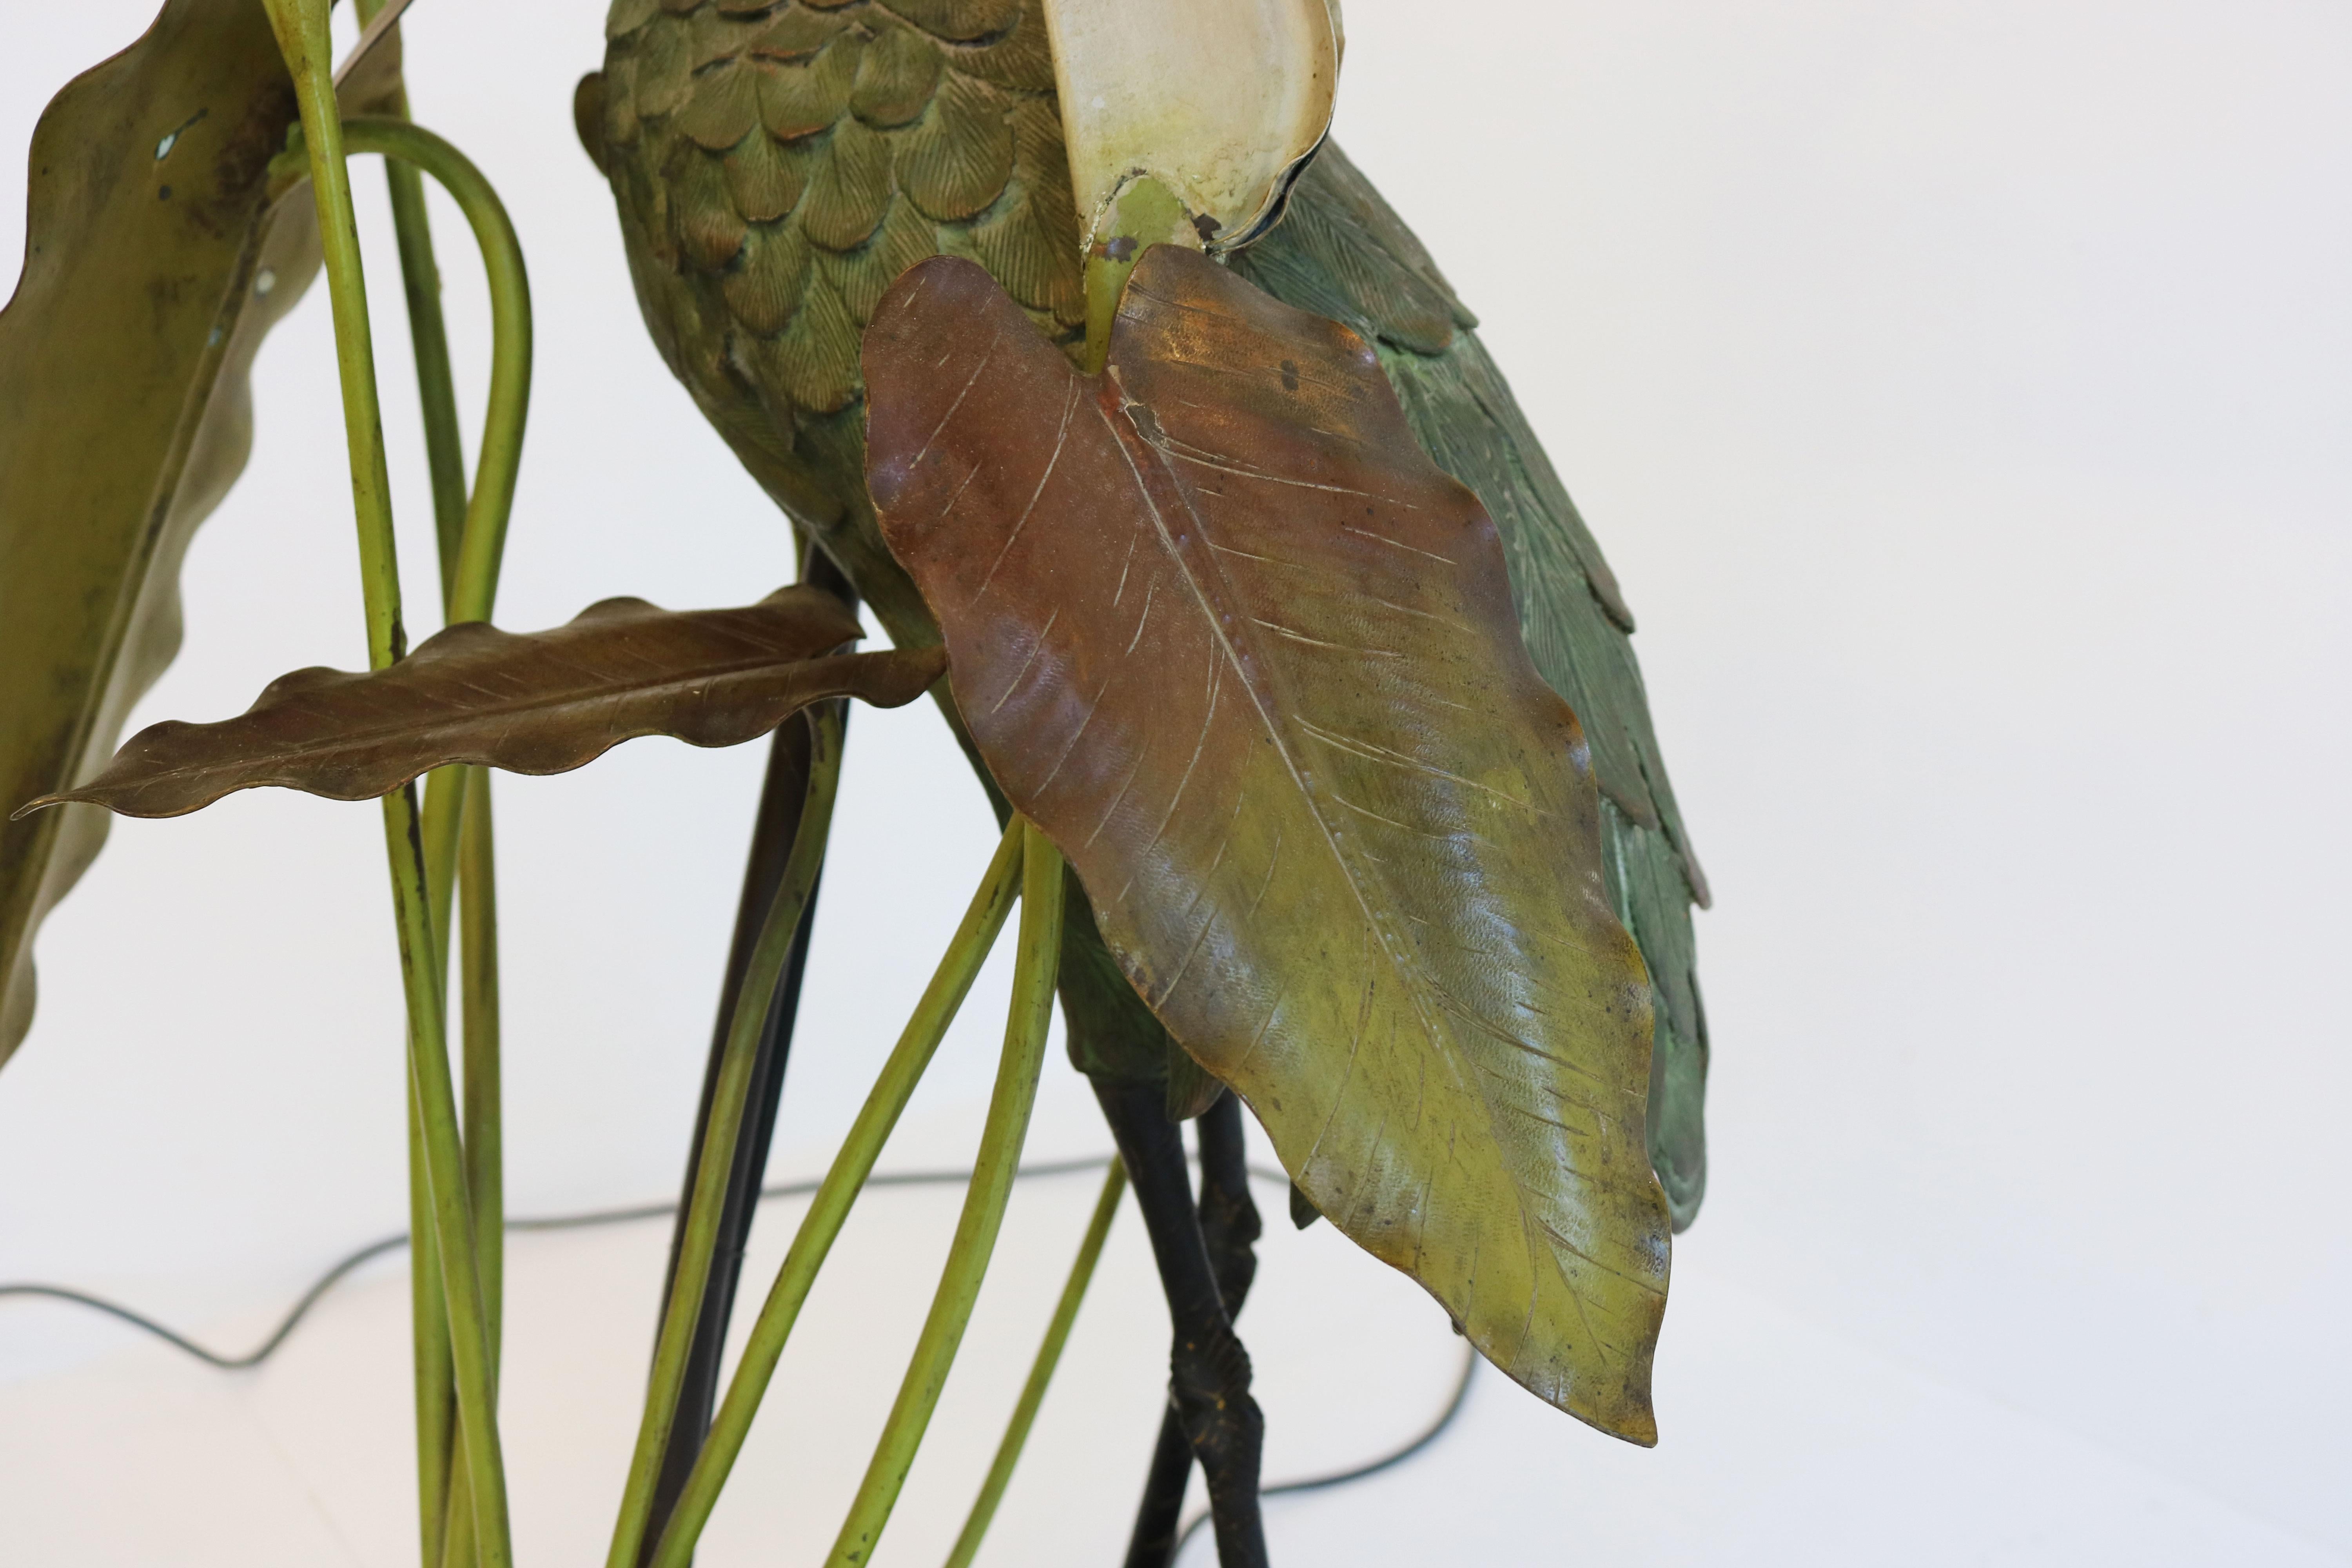 Exquisite Antique French Heron Art Nouveau Floor Lamp Bronze Floral Lilly Pads For Sale 9